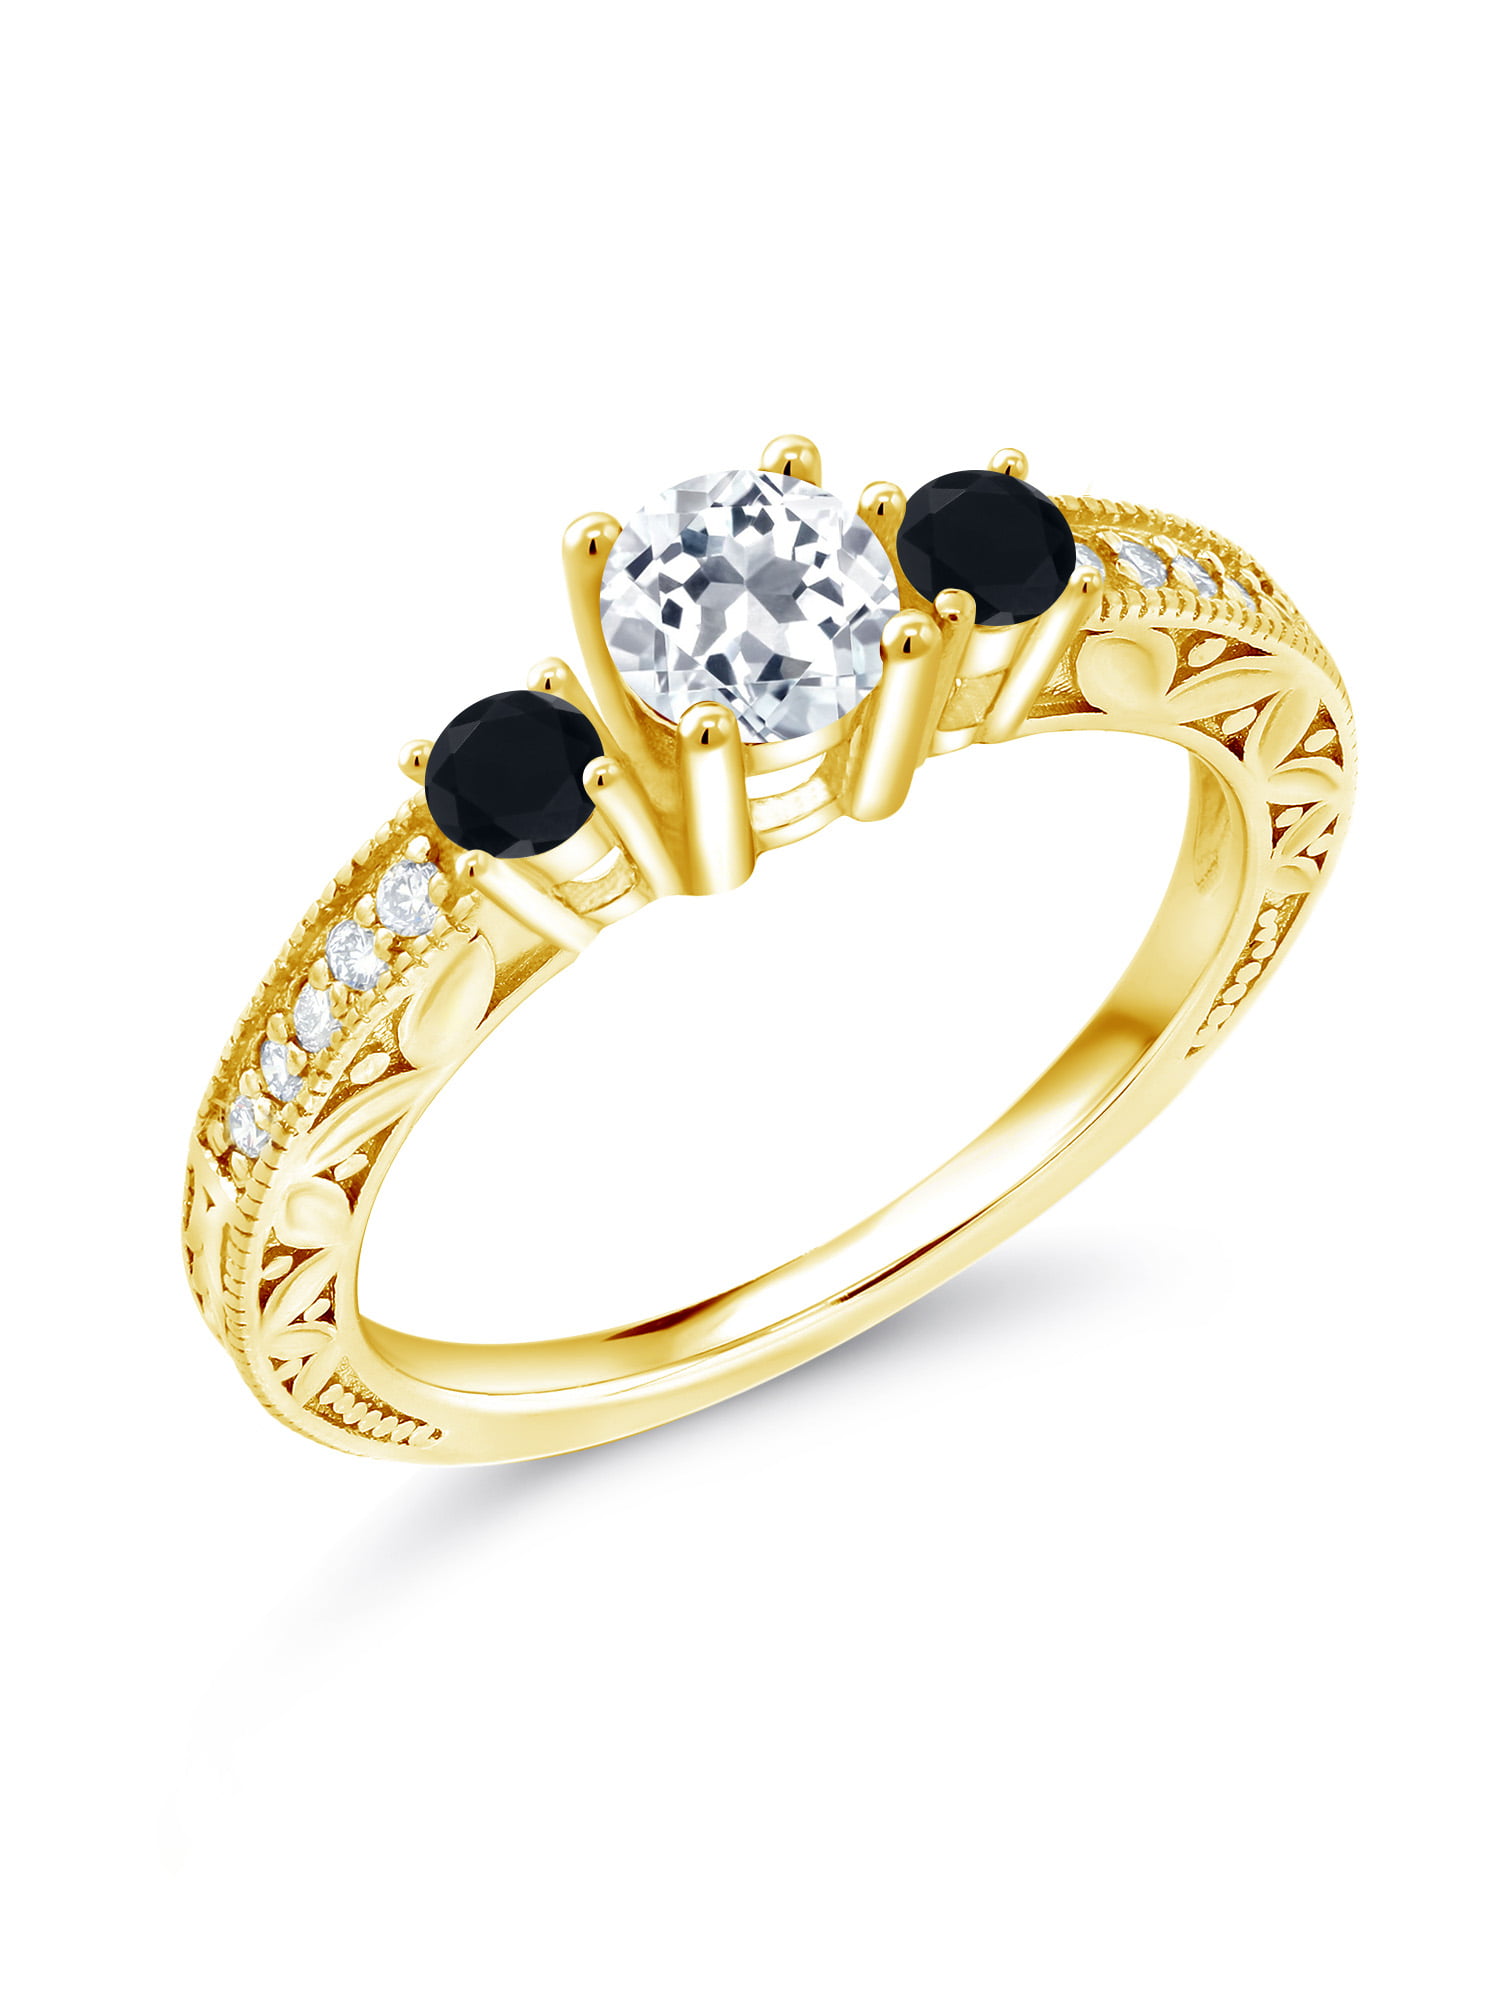 Gem Stone King 0.93 Ct Round White Topaz Black Onyx 18K Yellow Gold Plated  Silver Ring